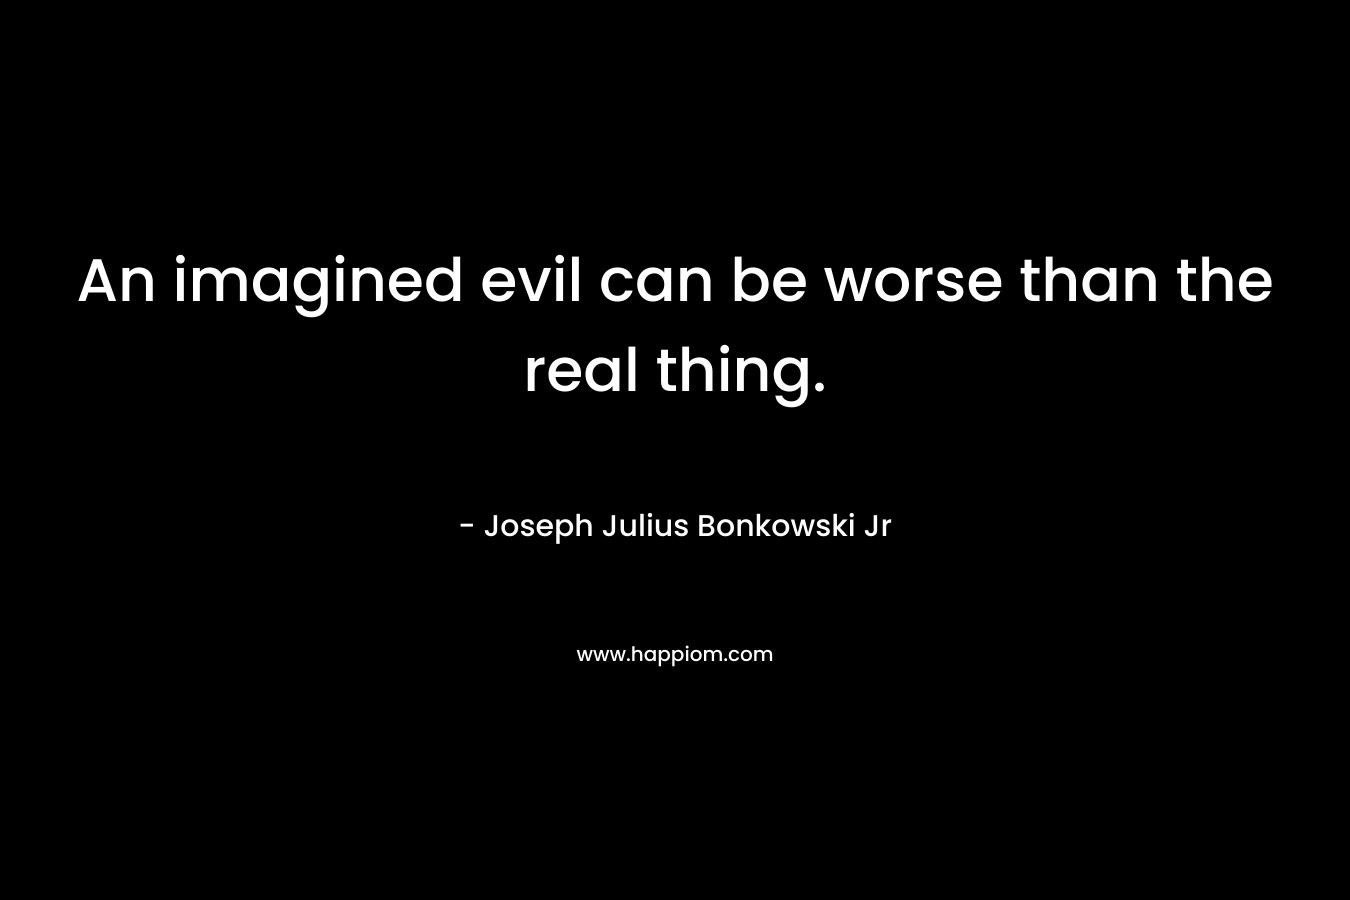 An imagined evil can be worse than the real thing.